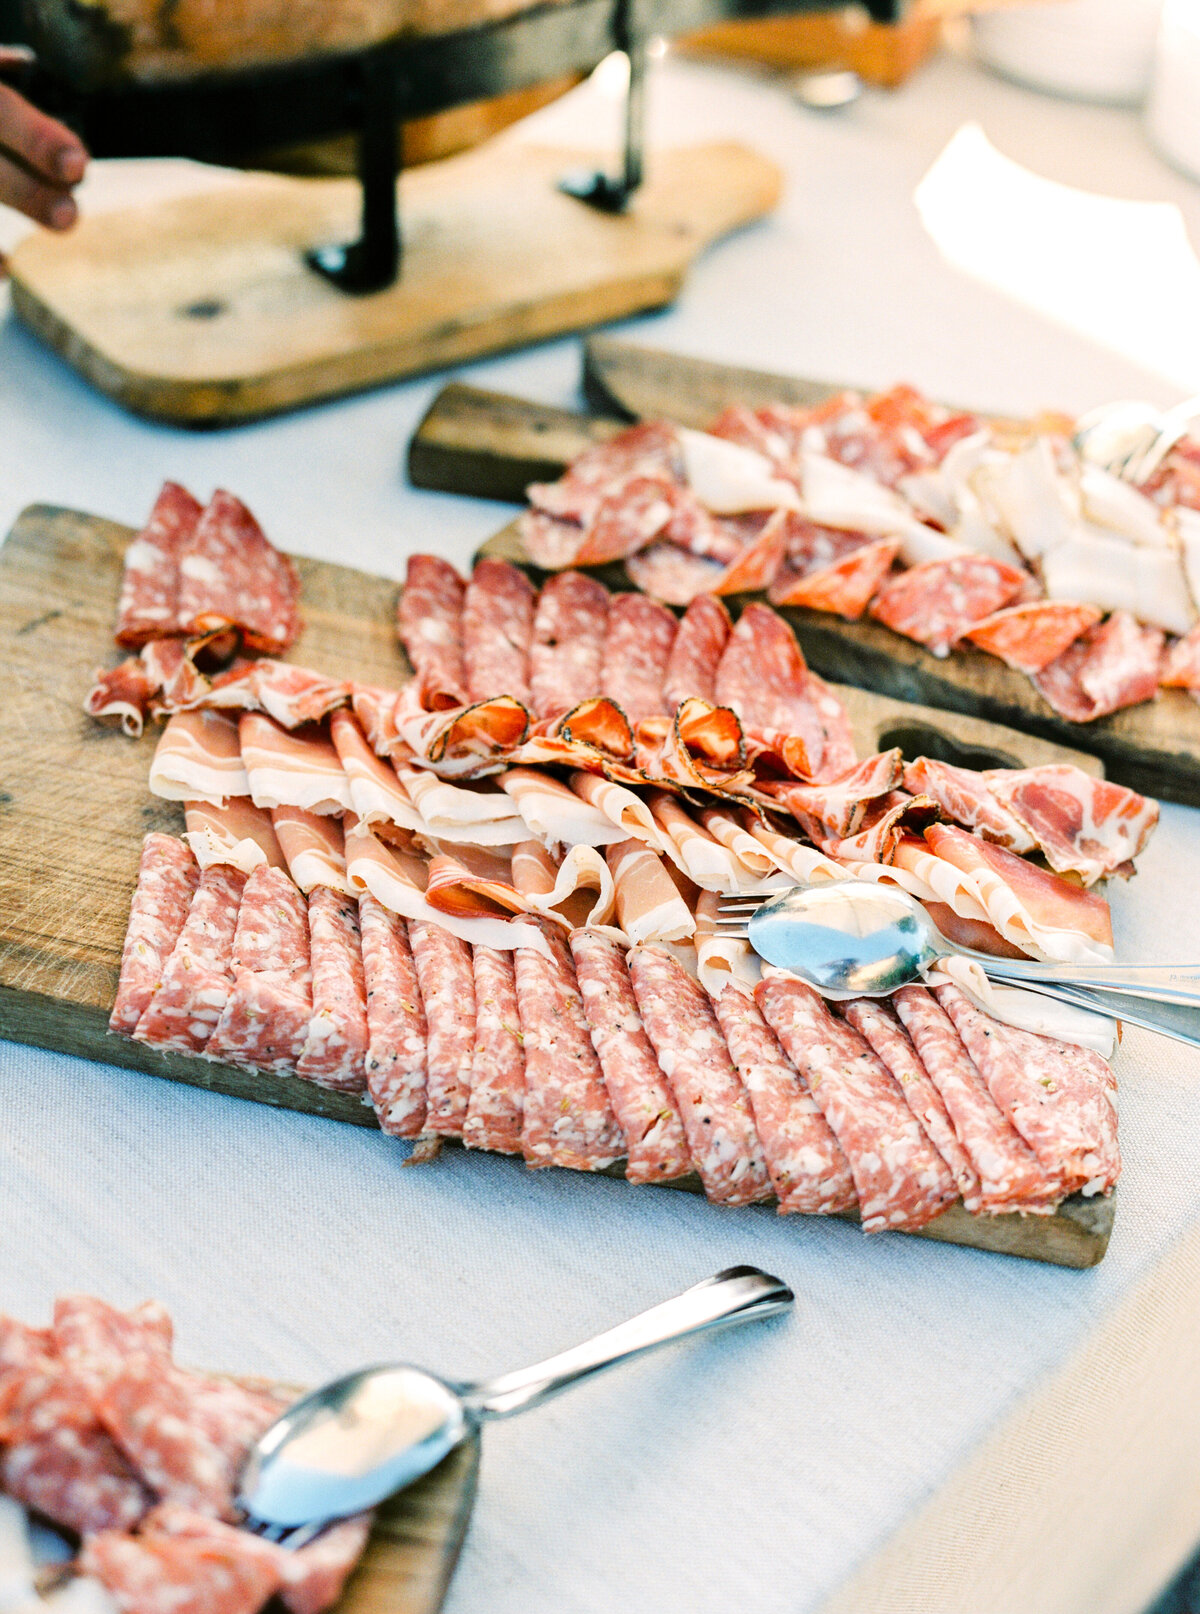 Film photograph of charcuterie meats photographed by Italy wedding photographer at Villa Montanare Tuscany wedding